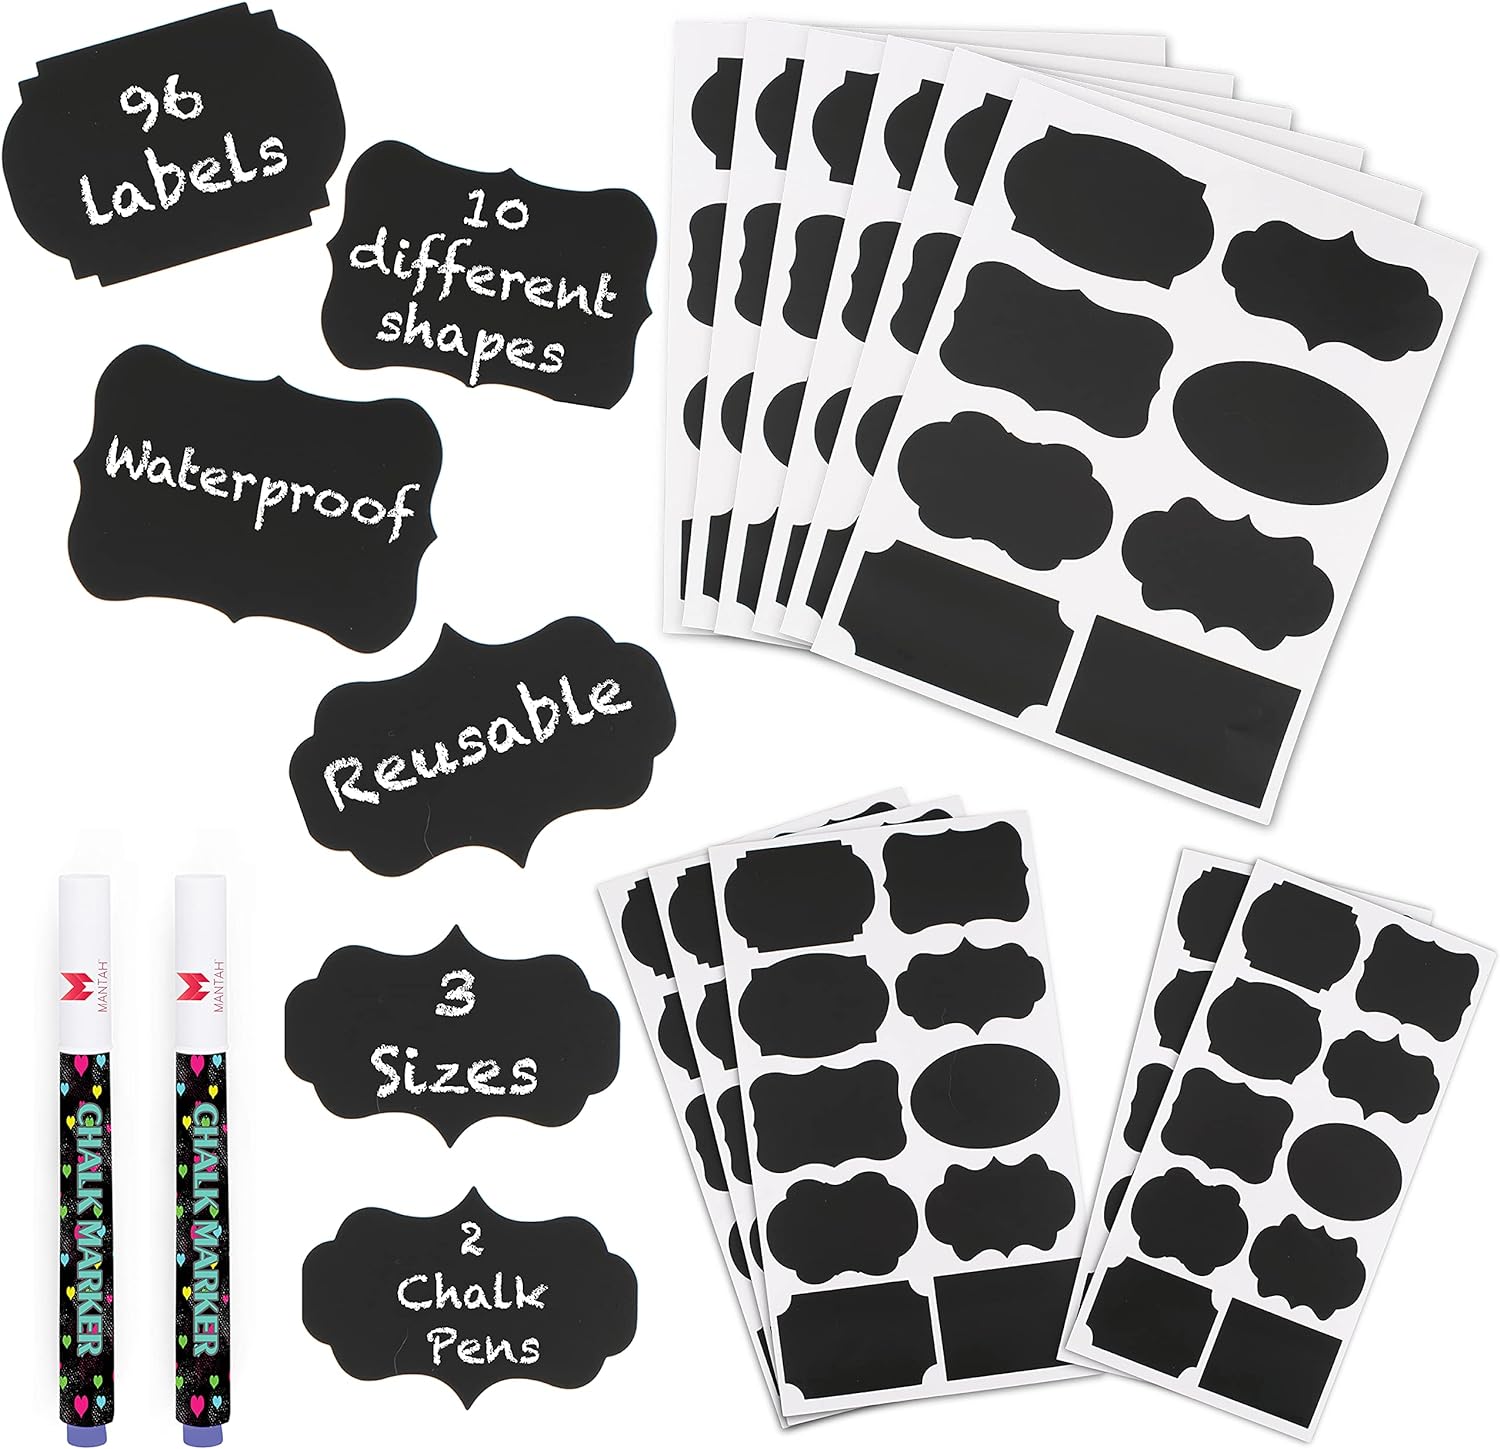 Mantah Chalkboard Label Stickers 96pcs 9 Assorted Shapes In 3 Sizes With 2 White Chalk Marker Reusable Waterproof For Storage Bin Labels Food Container Jars